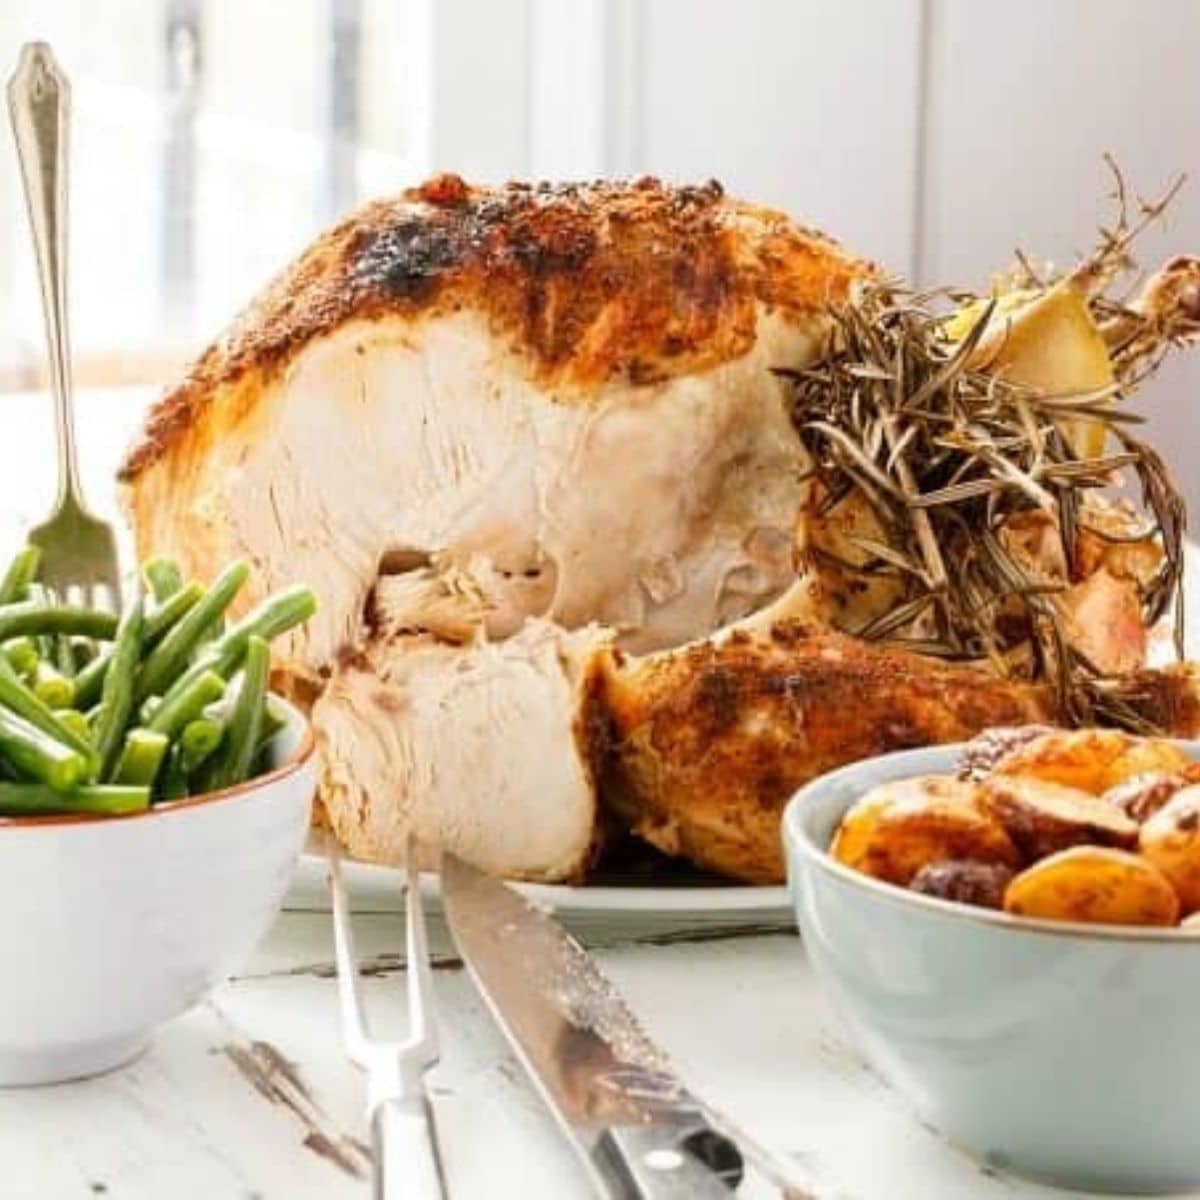 Slow cooker whole turkey on tray with bowls of asparagus and potatoes with knife and fork on table